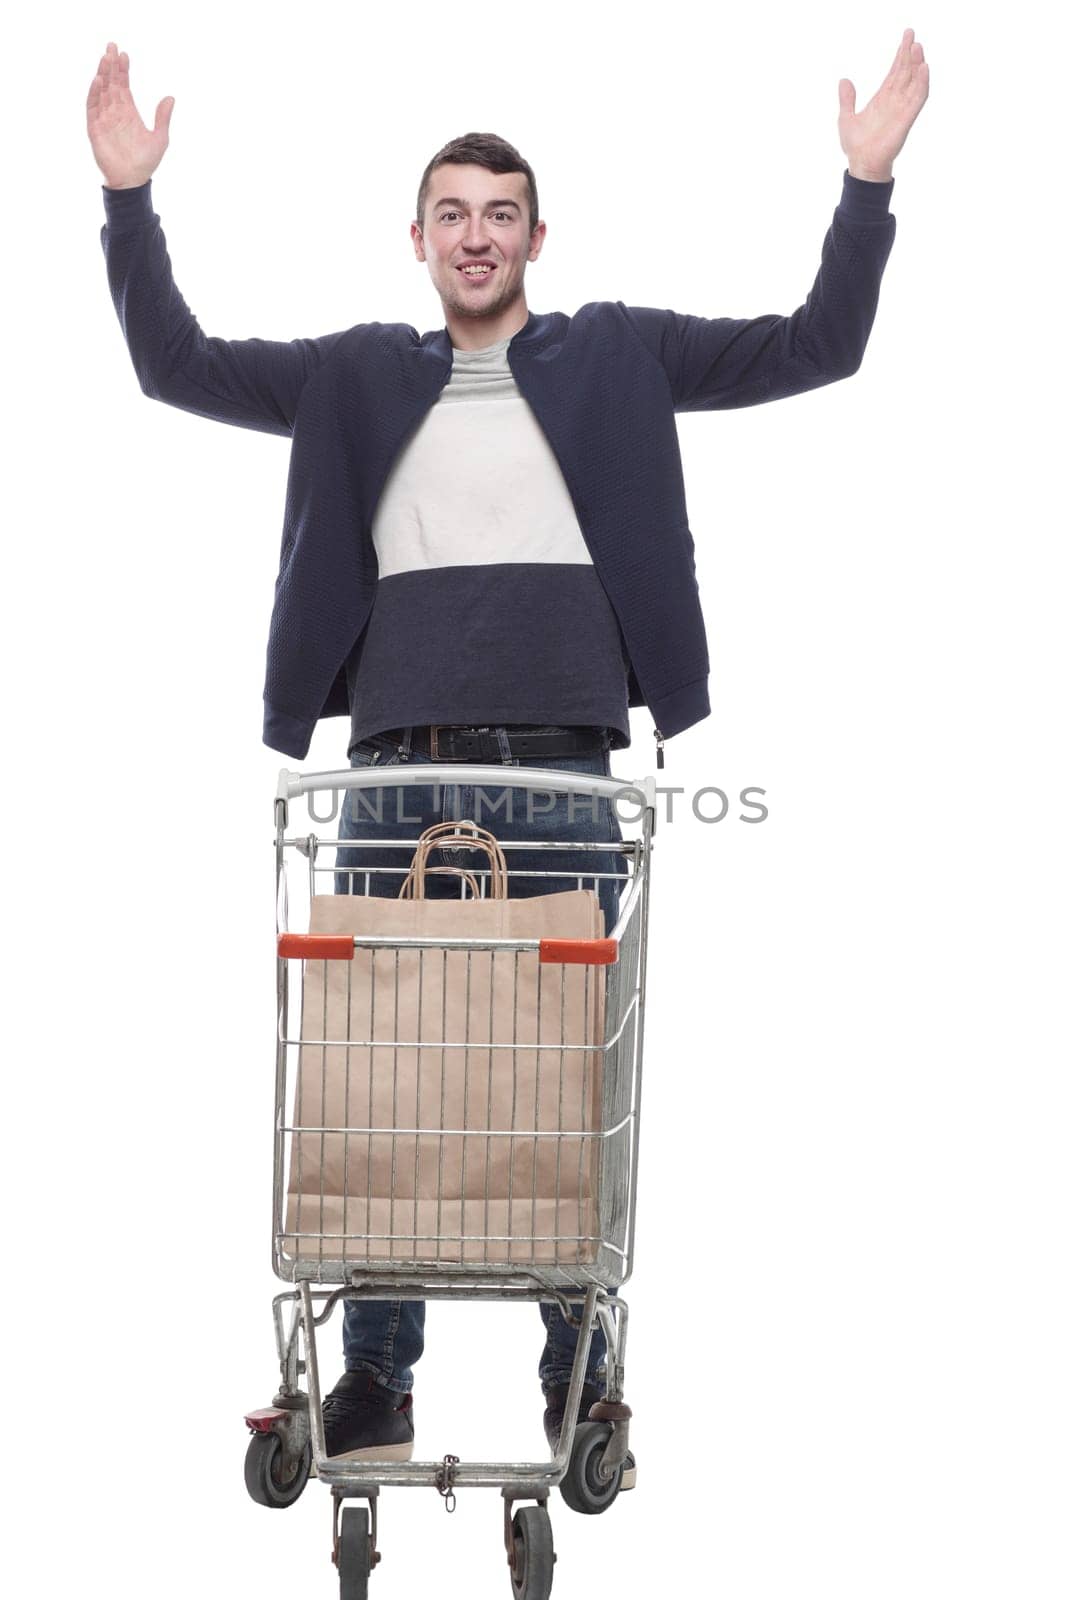 smiling young man with a shopping cart . isolated on a white background.